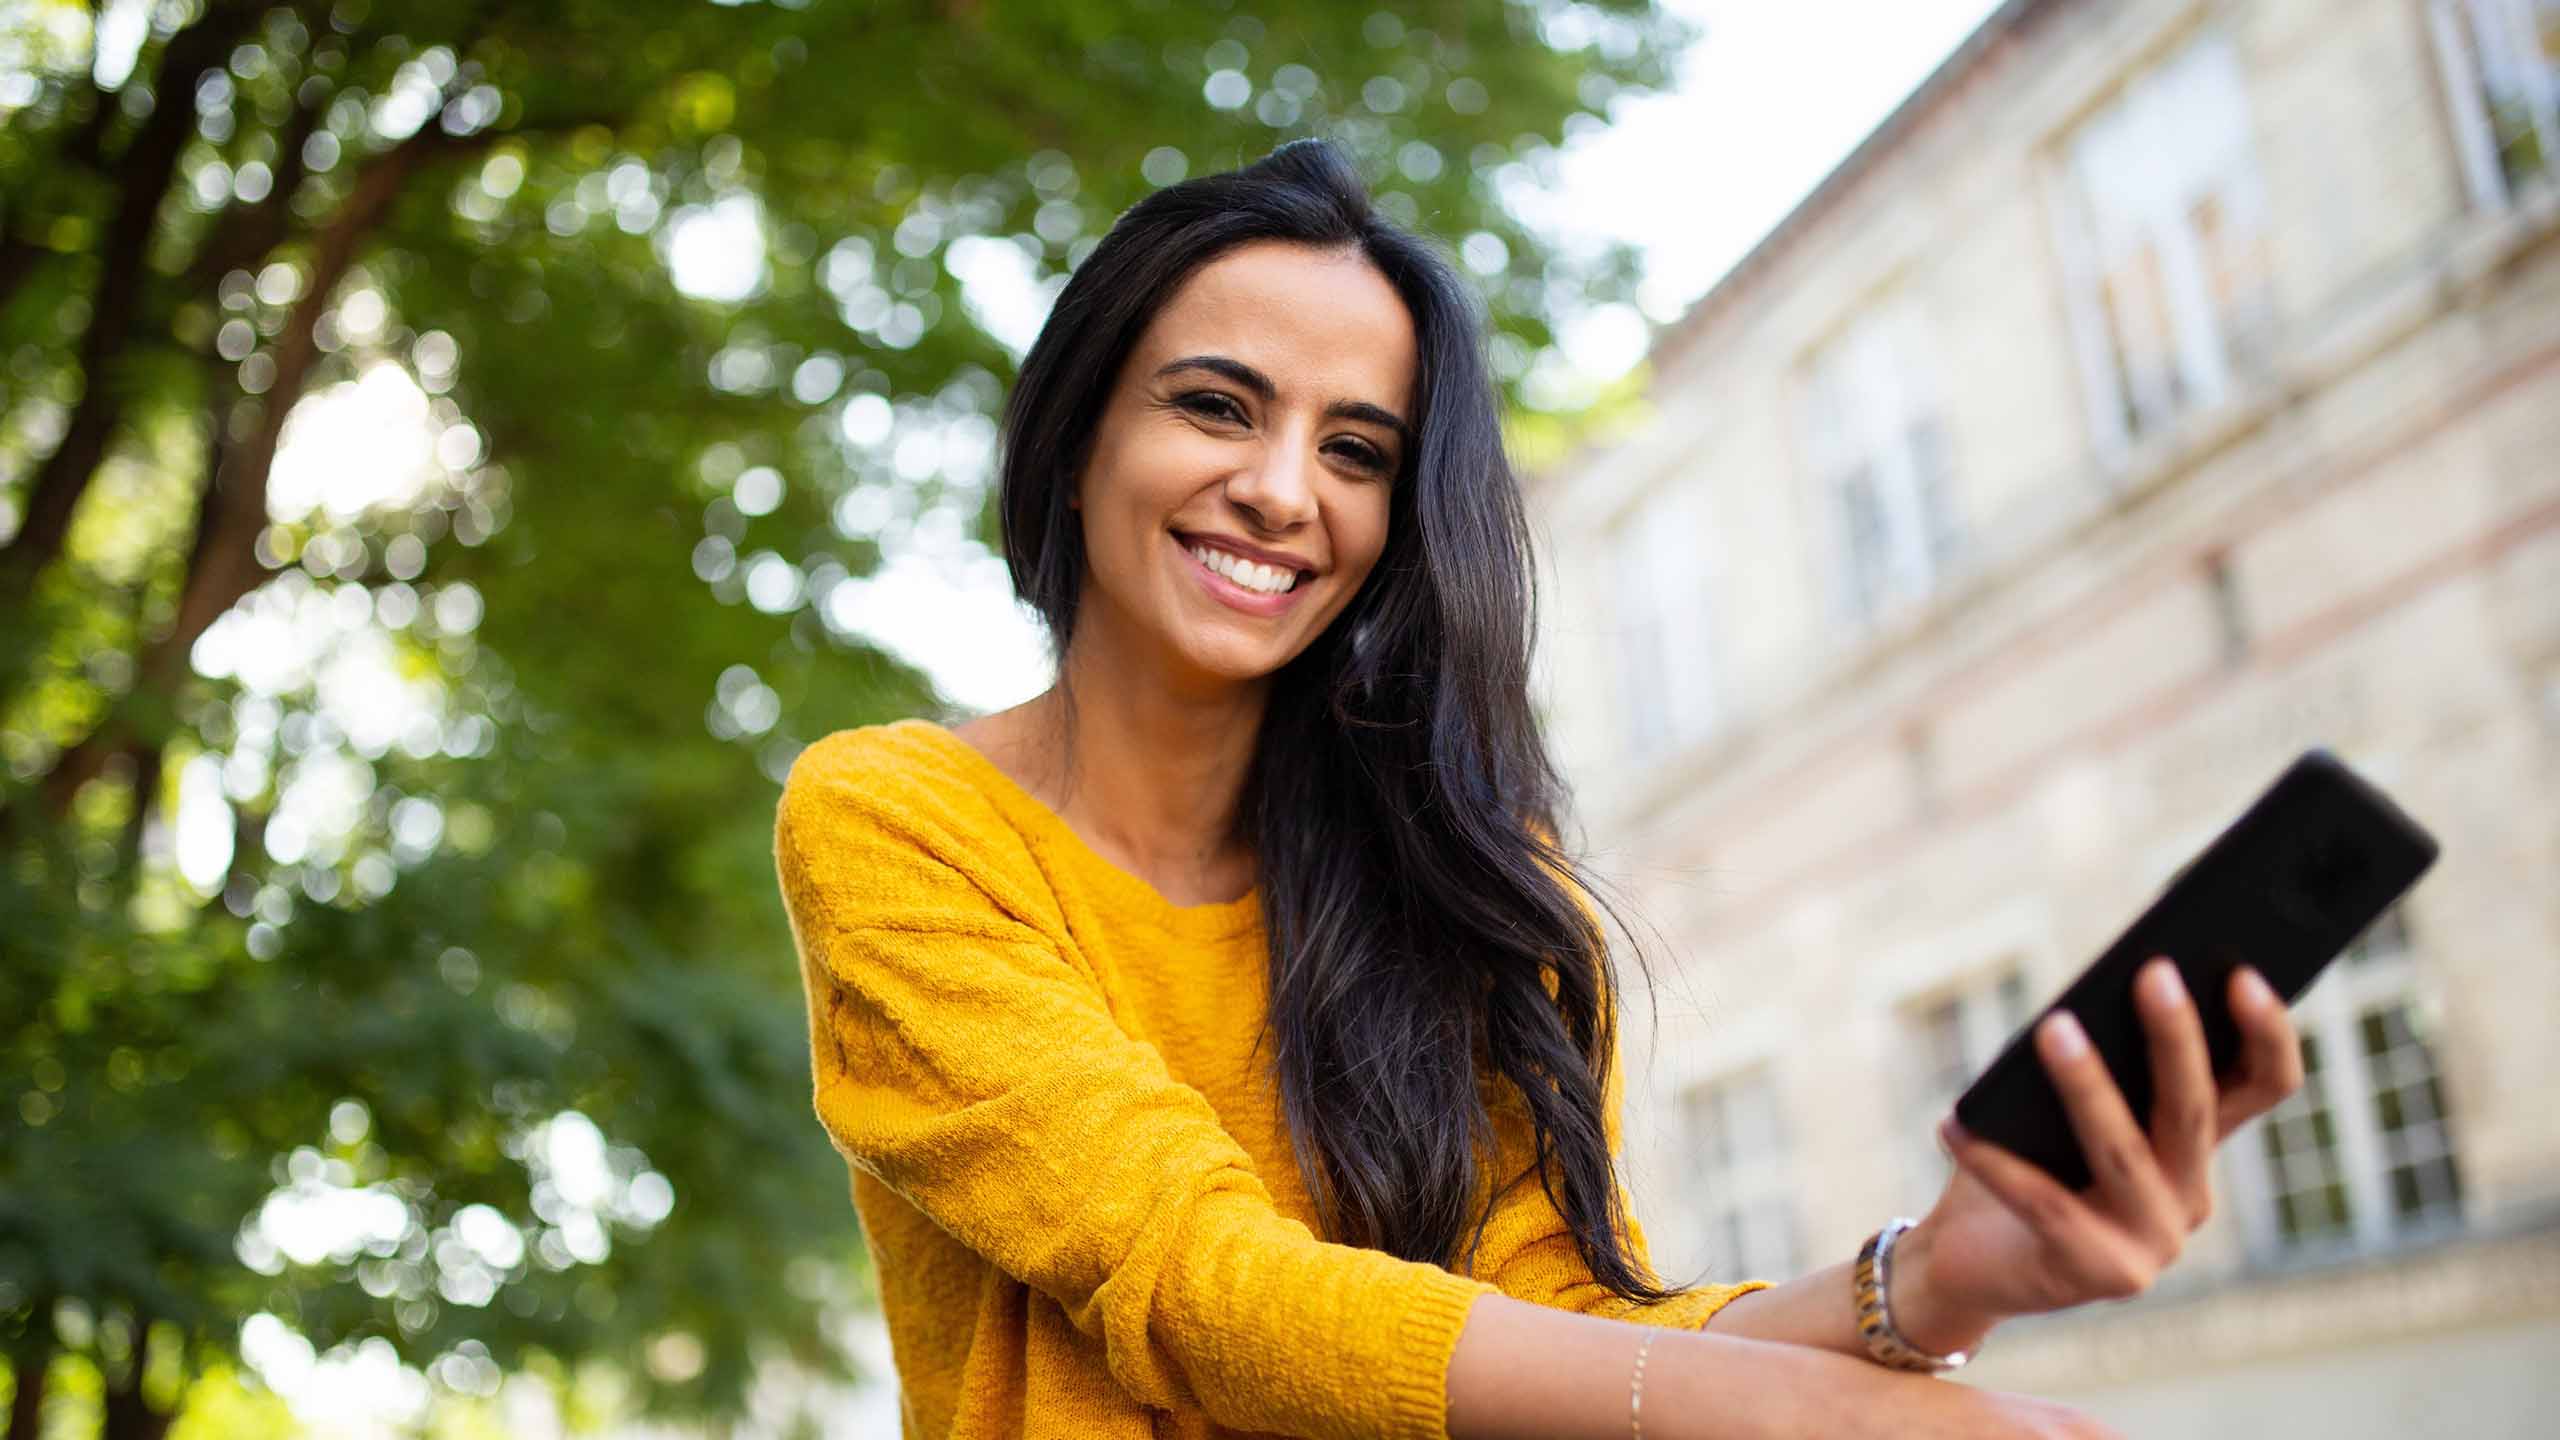 lady outside smiling with a mobile phone in her hand